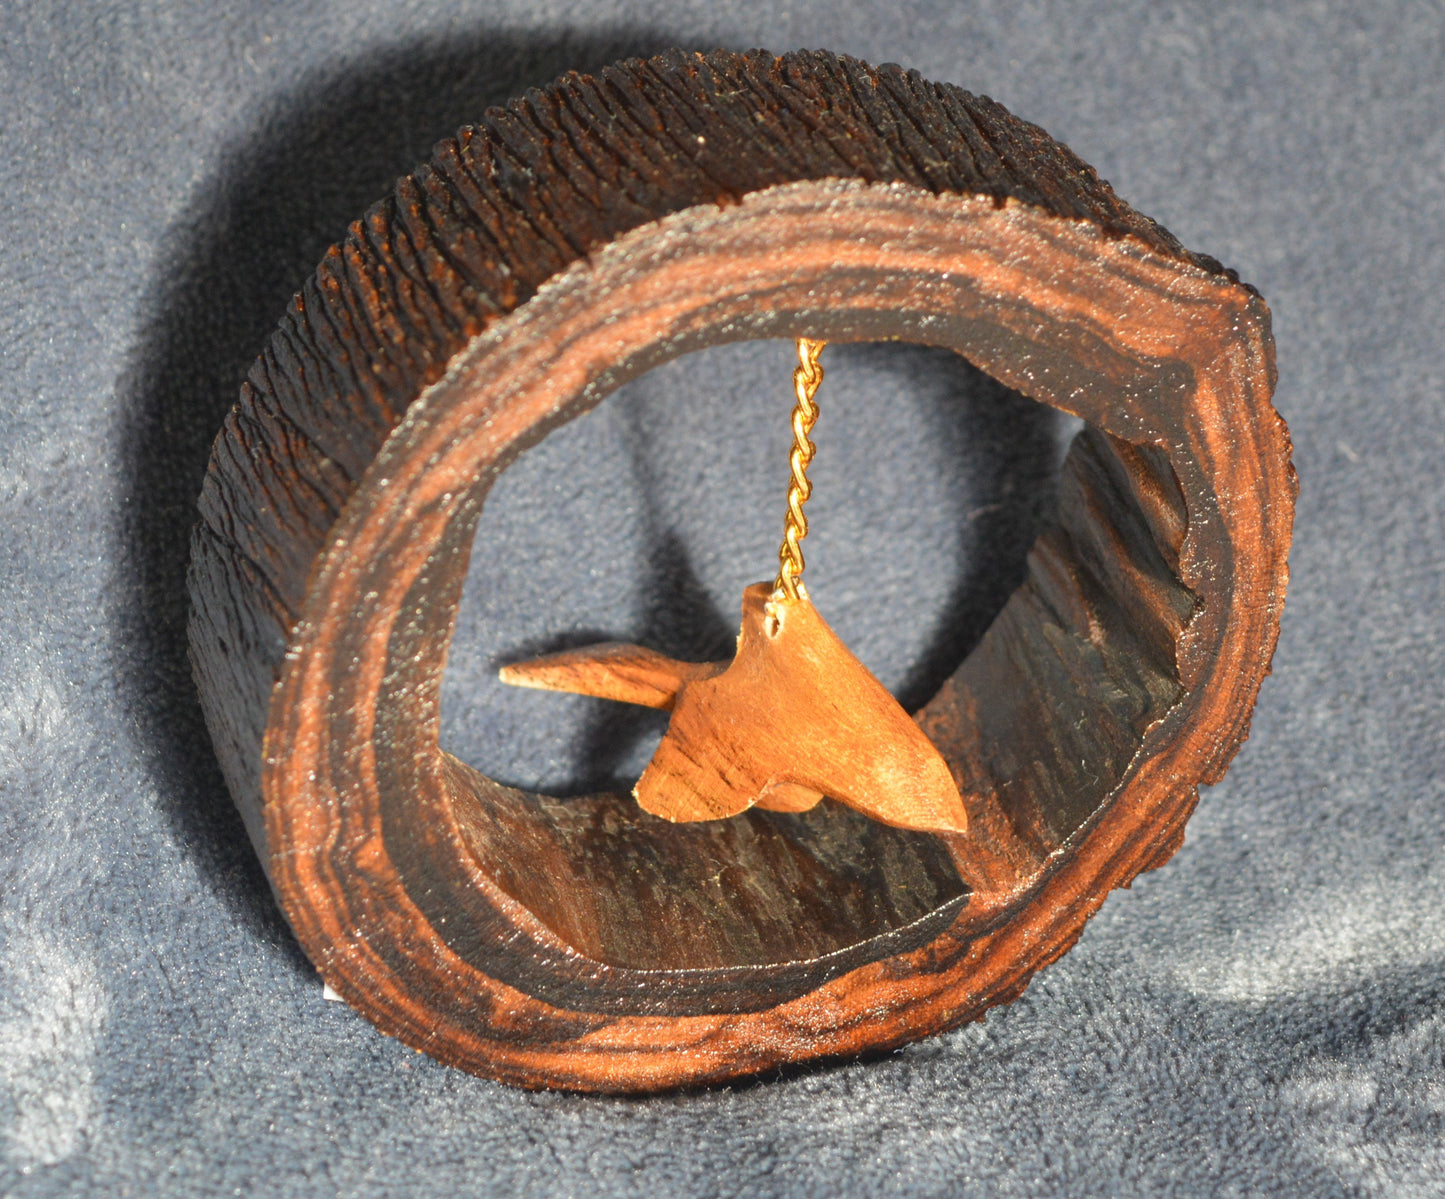 Hand carved wooden ornament